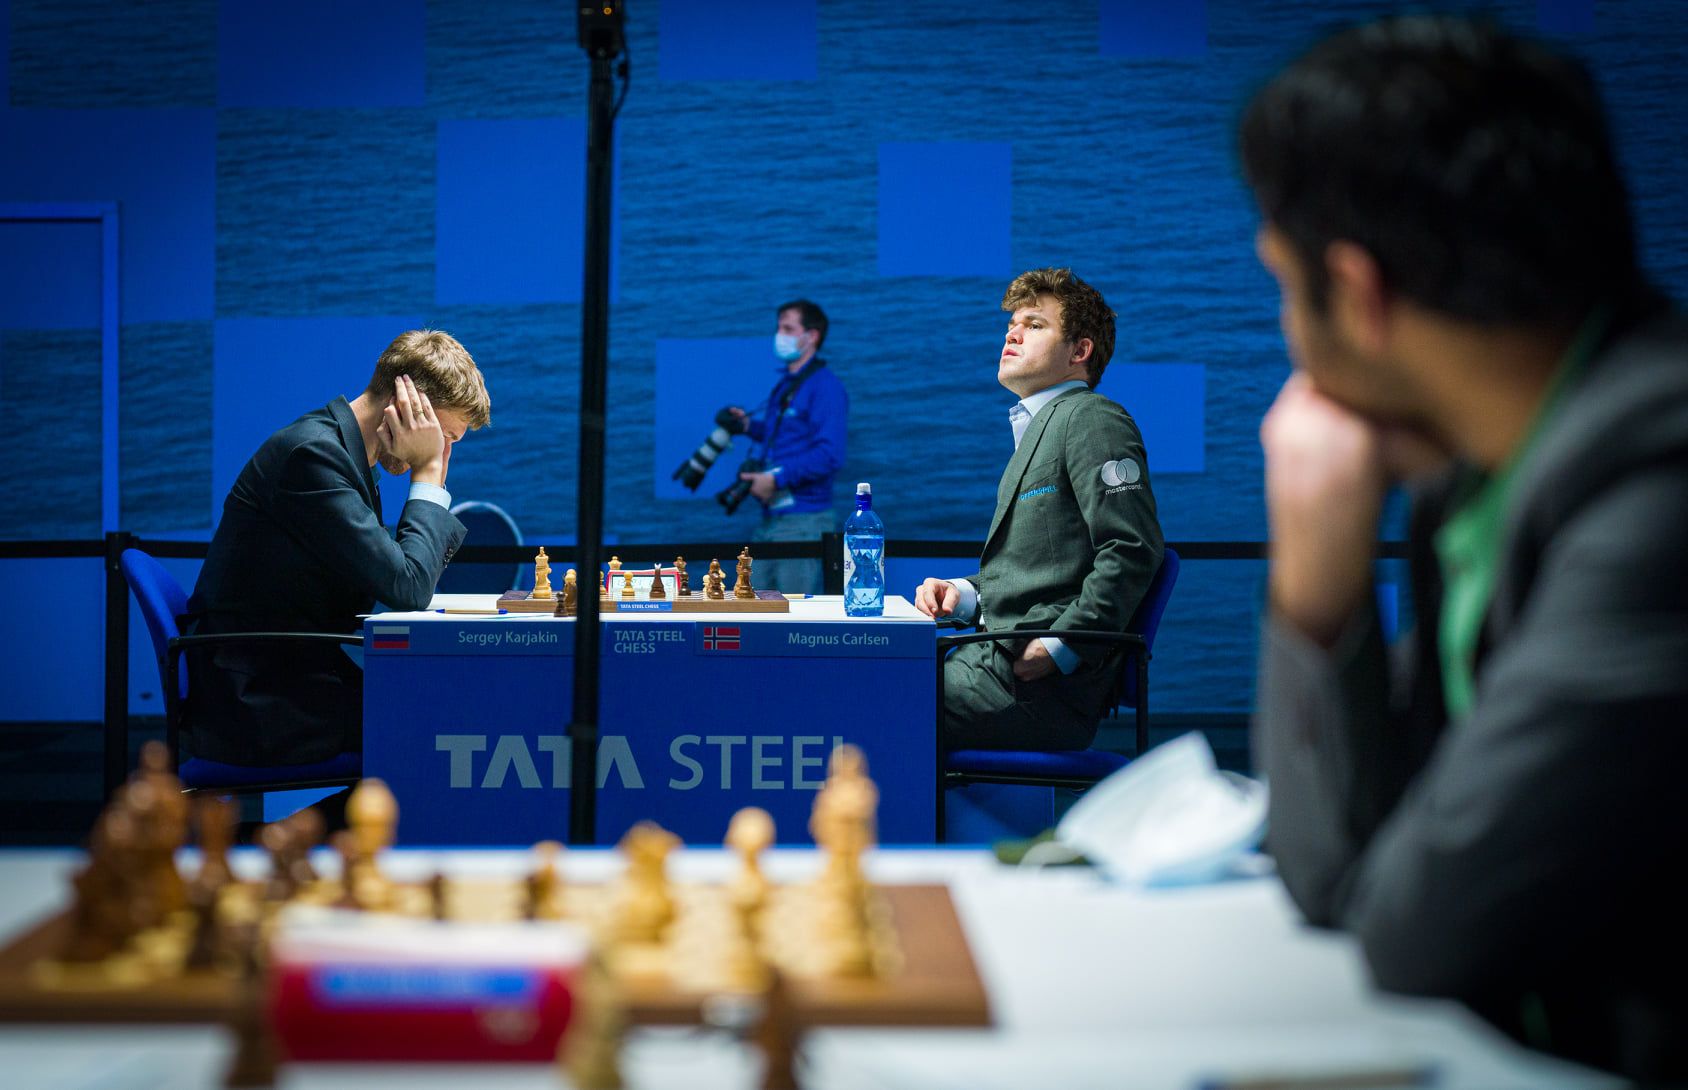 Tata Steel Chess Amateur registrations open on October 31